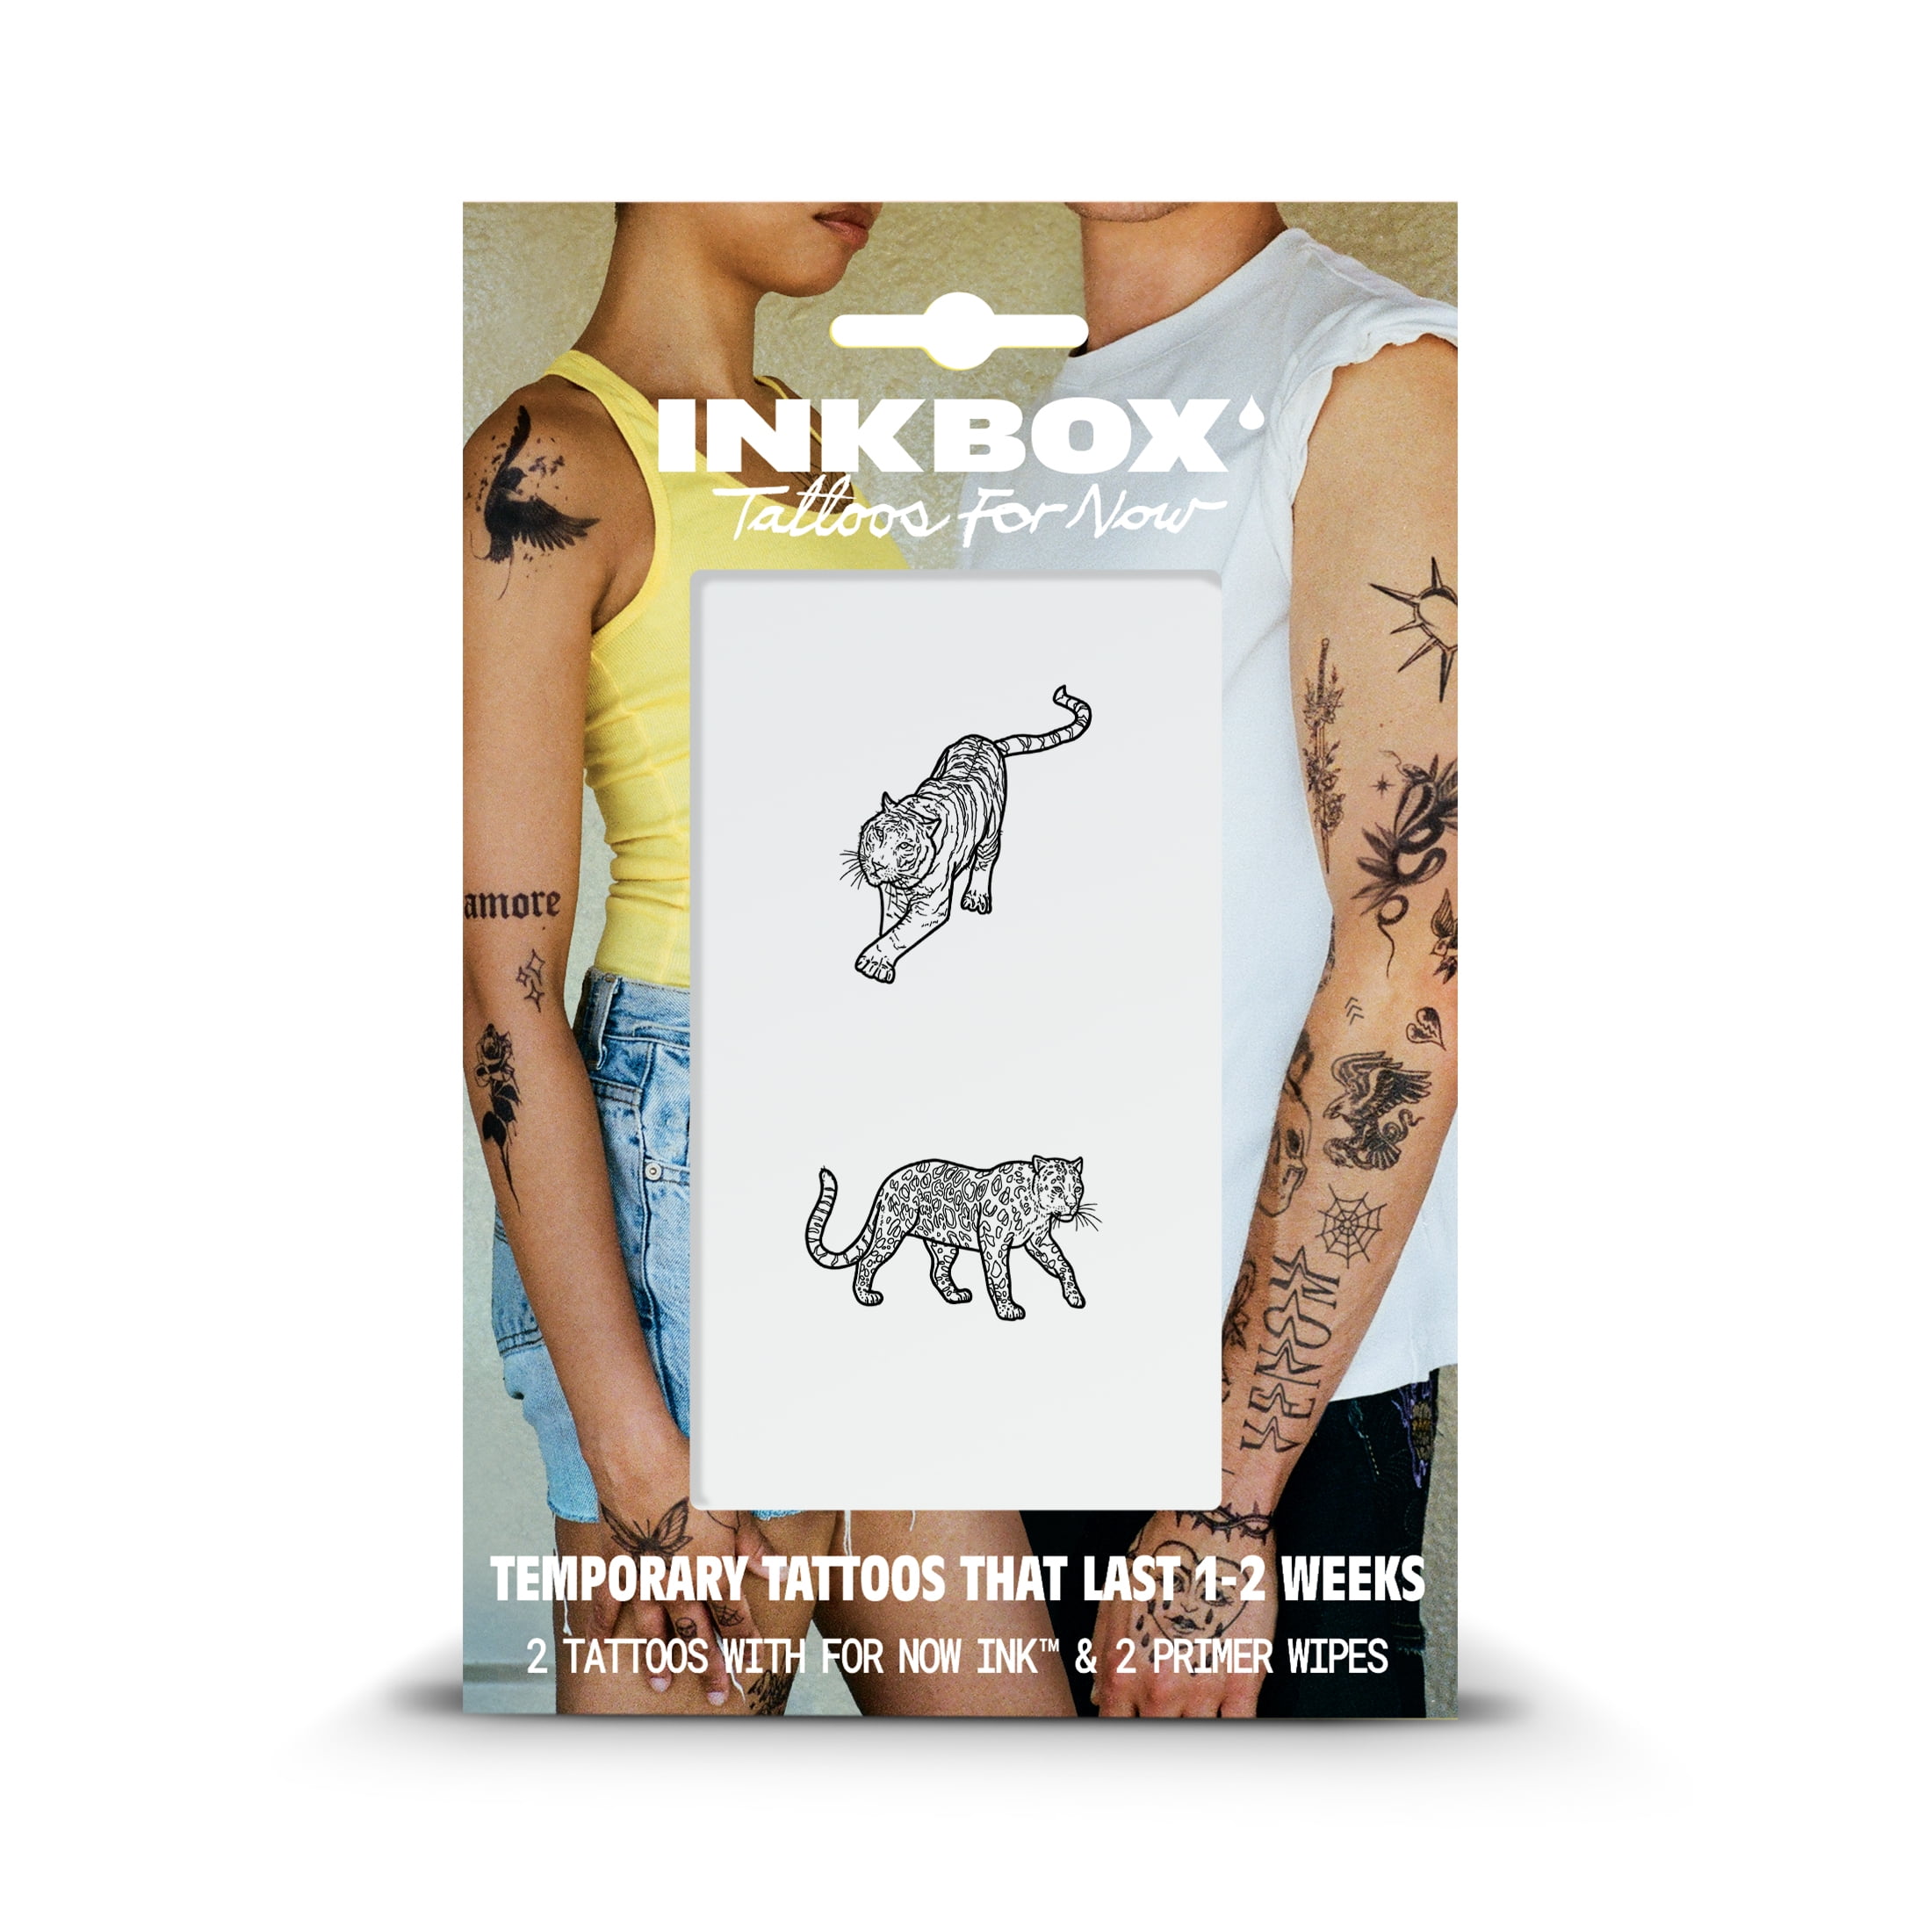 Inkbox Temporary Tattoos Tiger Leopard Water Resistant Perfect for Any Occasion Black 2 Pack c4c882da bce4 458b b171 2281f96de017.e6ae62e5a59fd9ad633b9b9e3304a27e